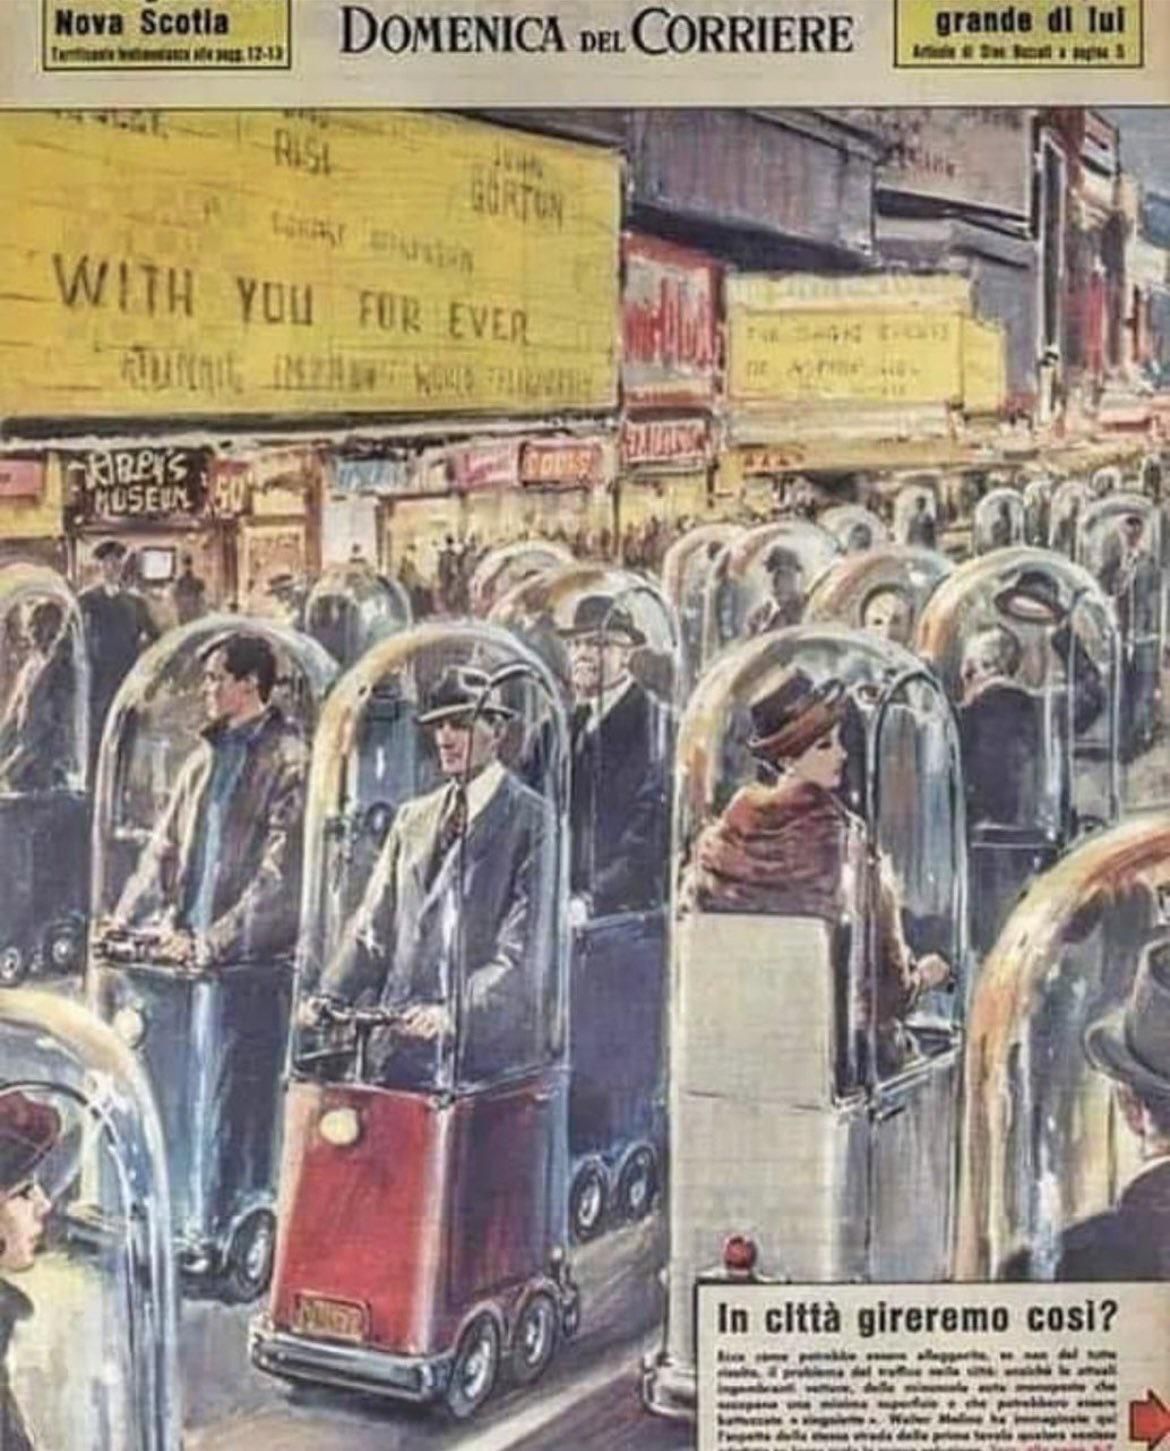 In 1962, an Italian magazine published a story previewing what the world could look like in 2022